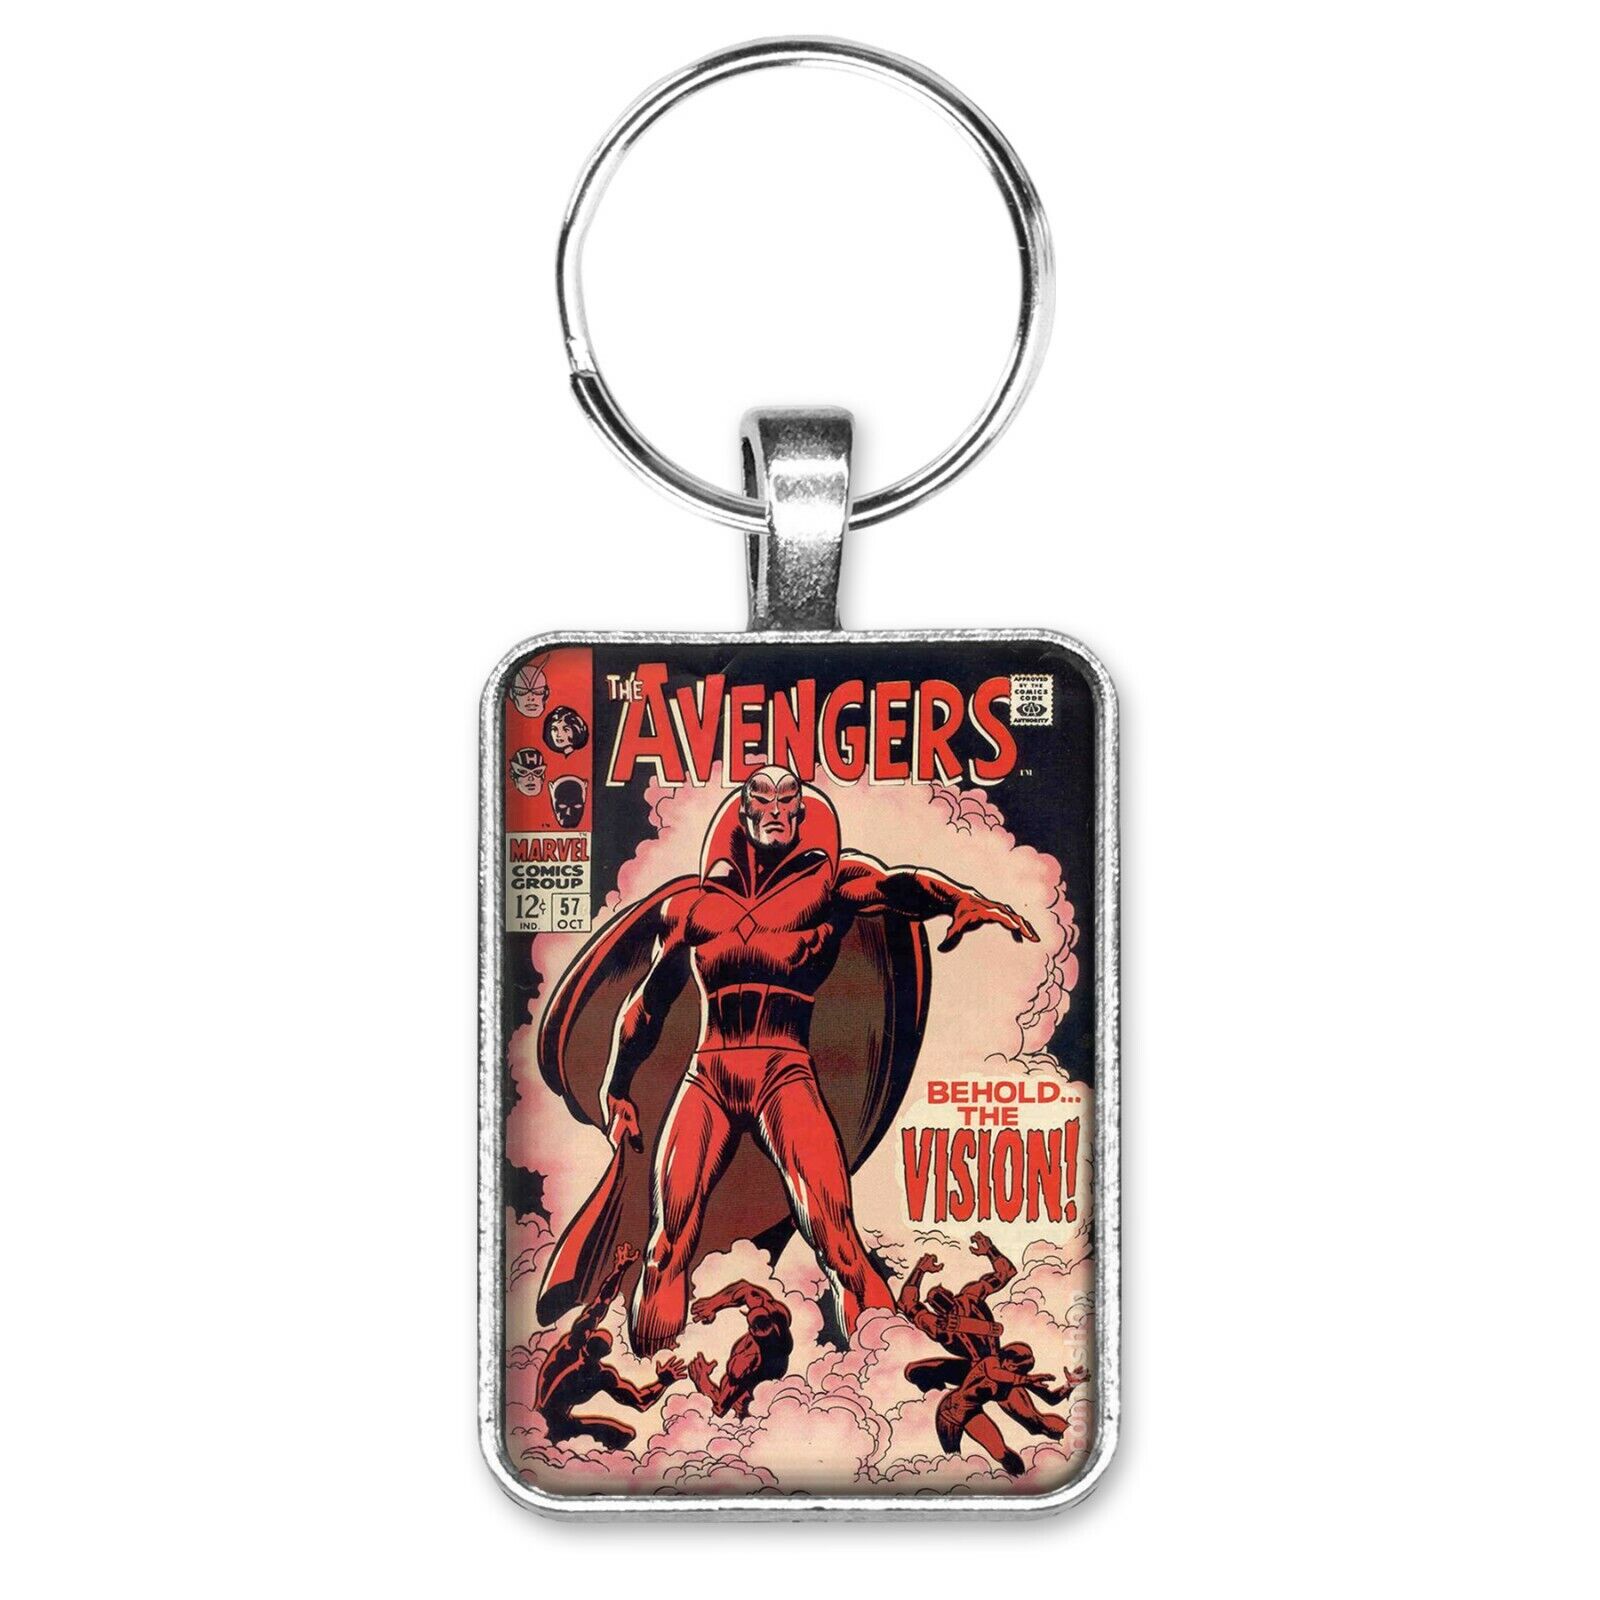 The Avengers #57 Cover Key Ring or Necklace The Vision First Appearance